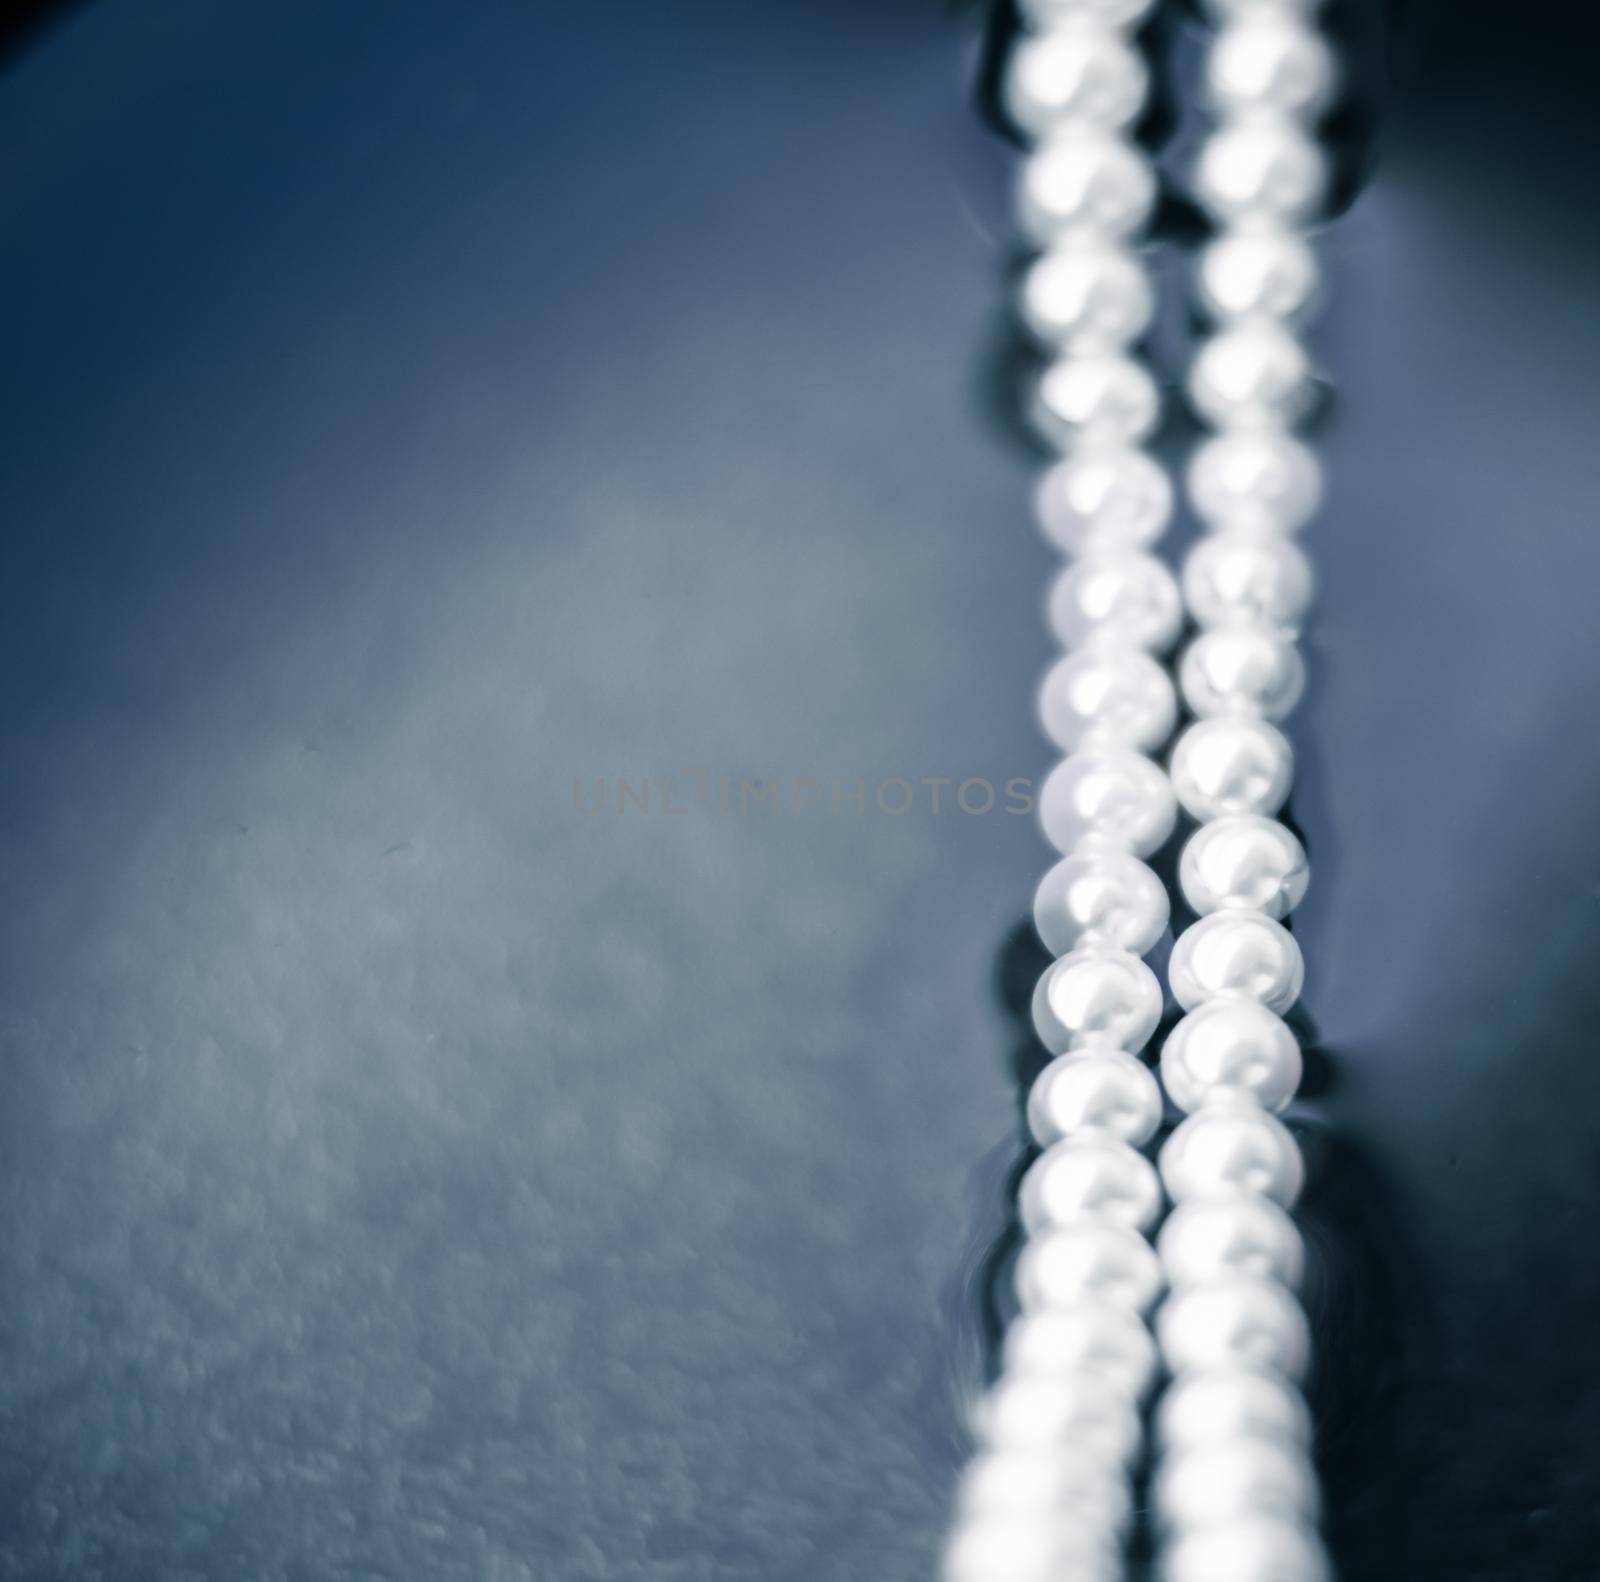 Pearl necklace, luxury jewellery background by Anneleven